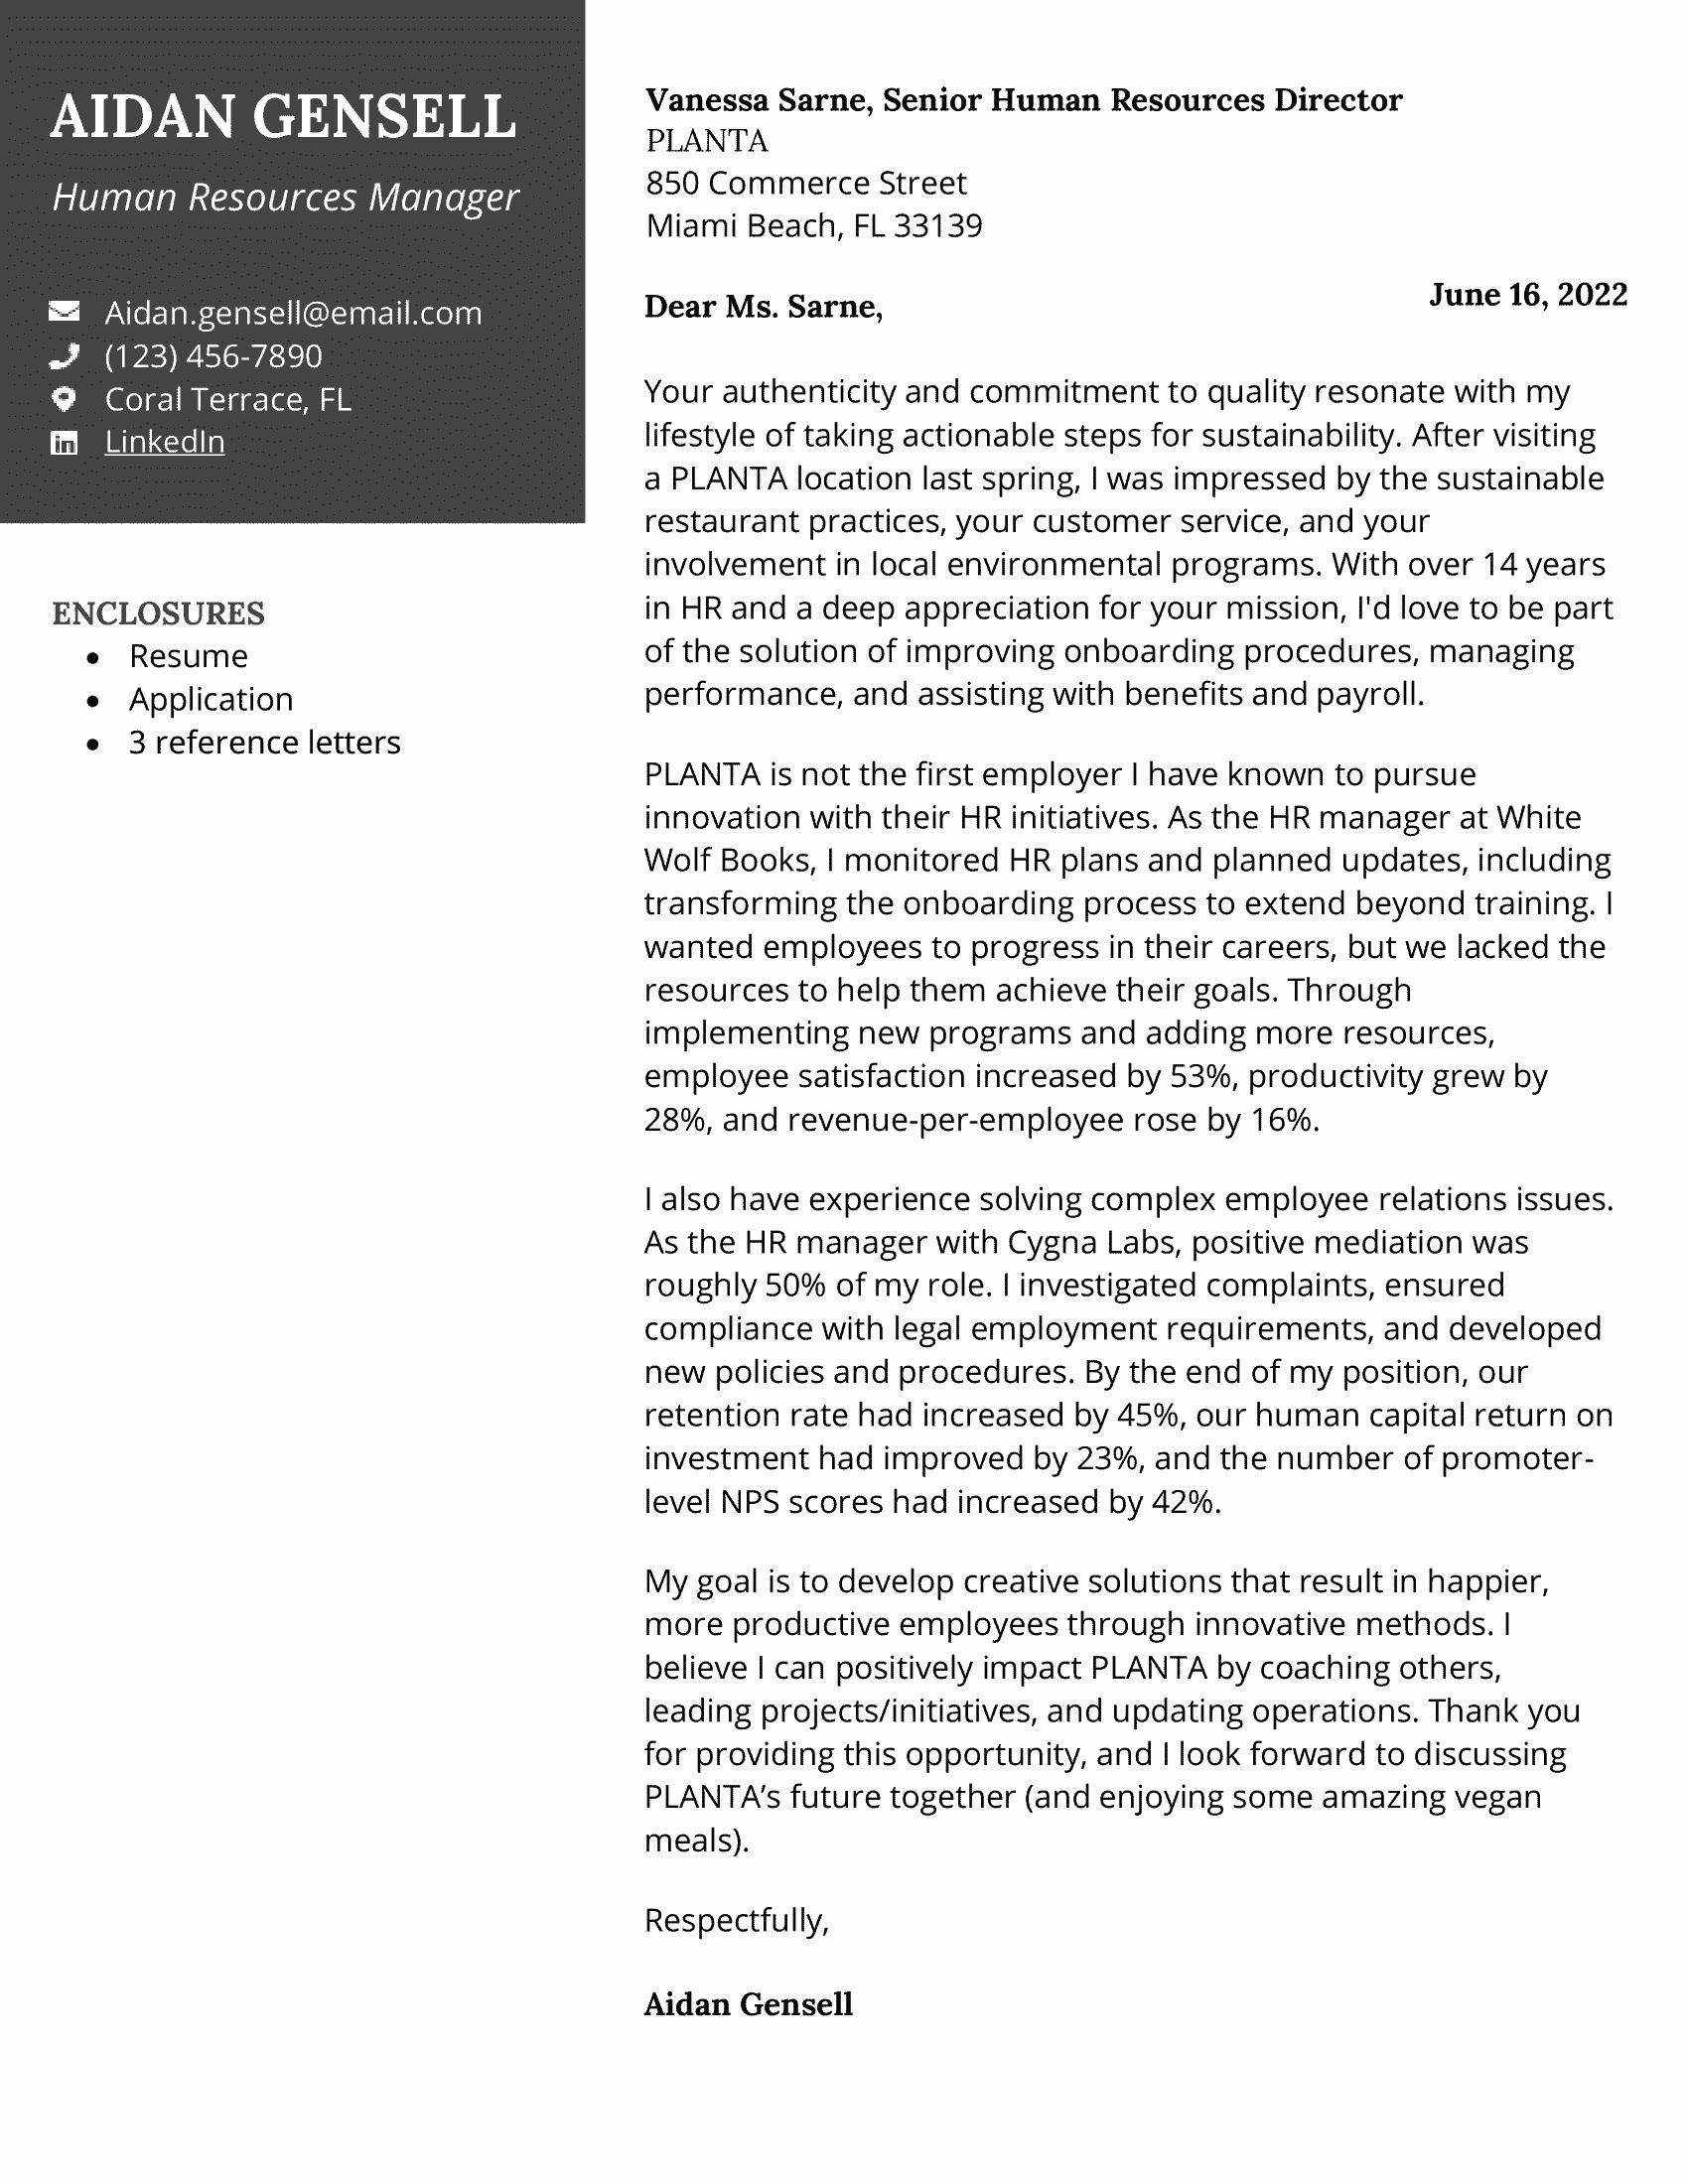 Human resources manager cover letter example with black contact header